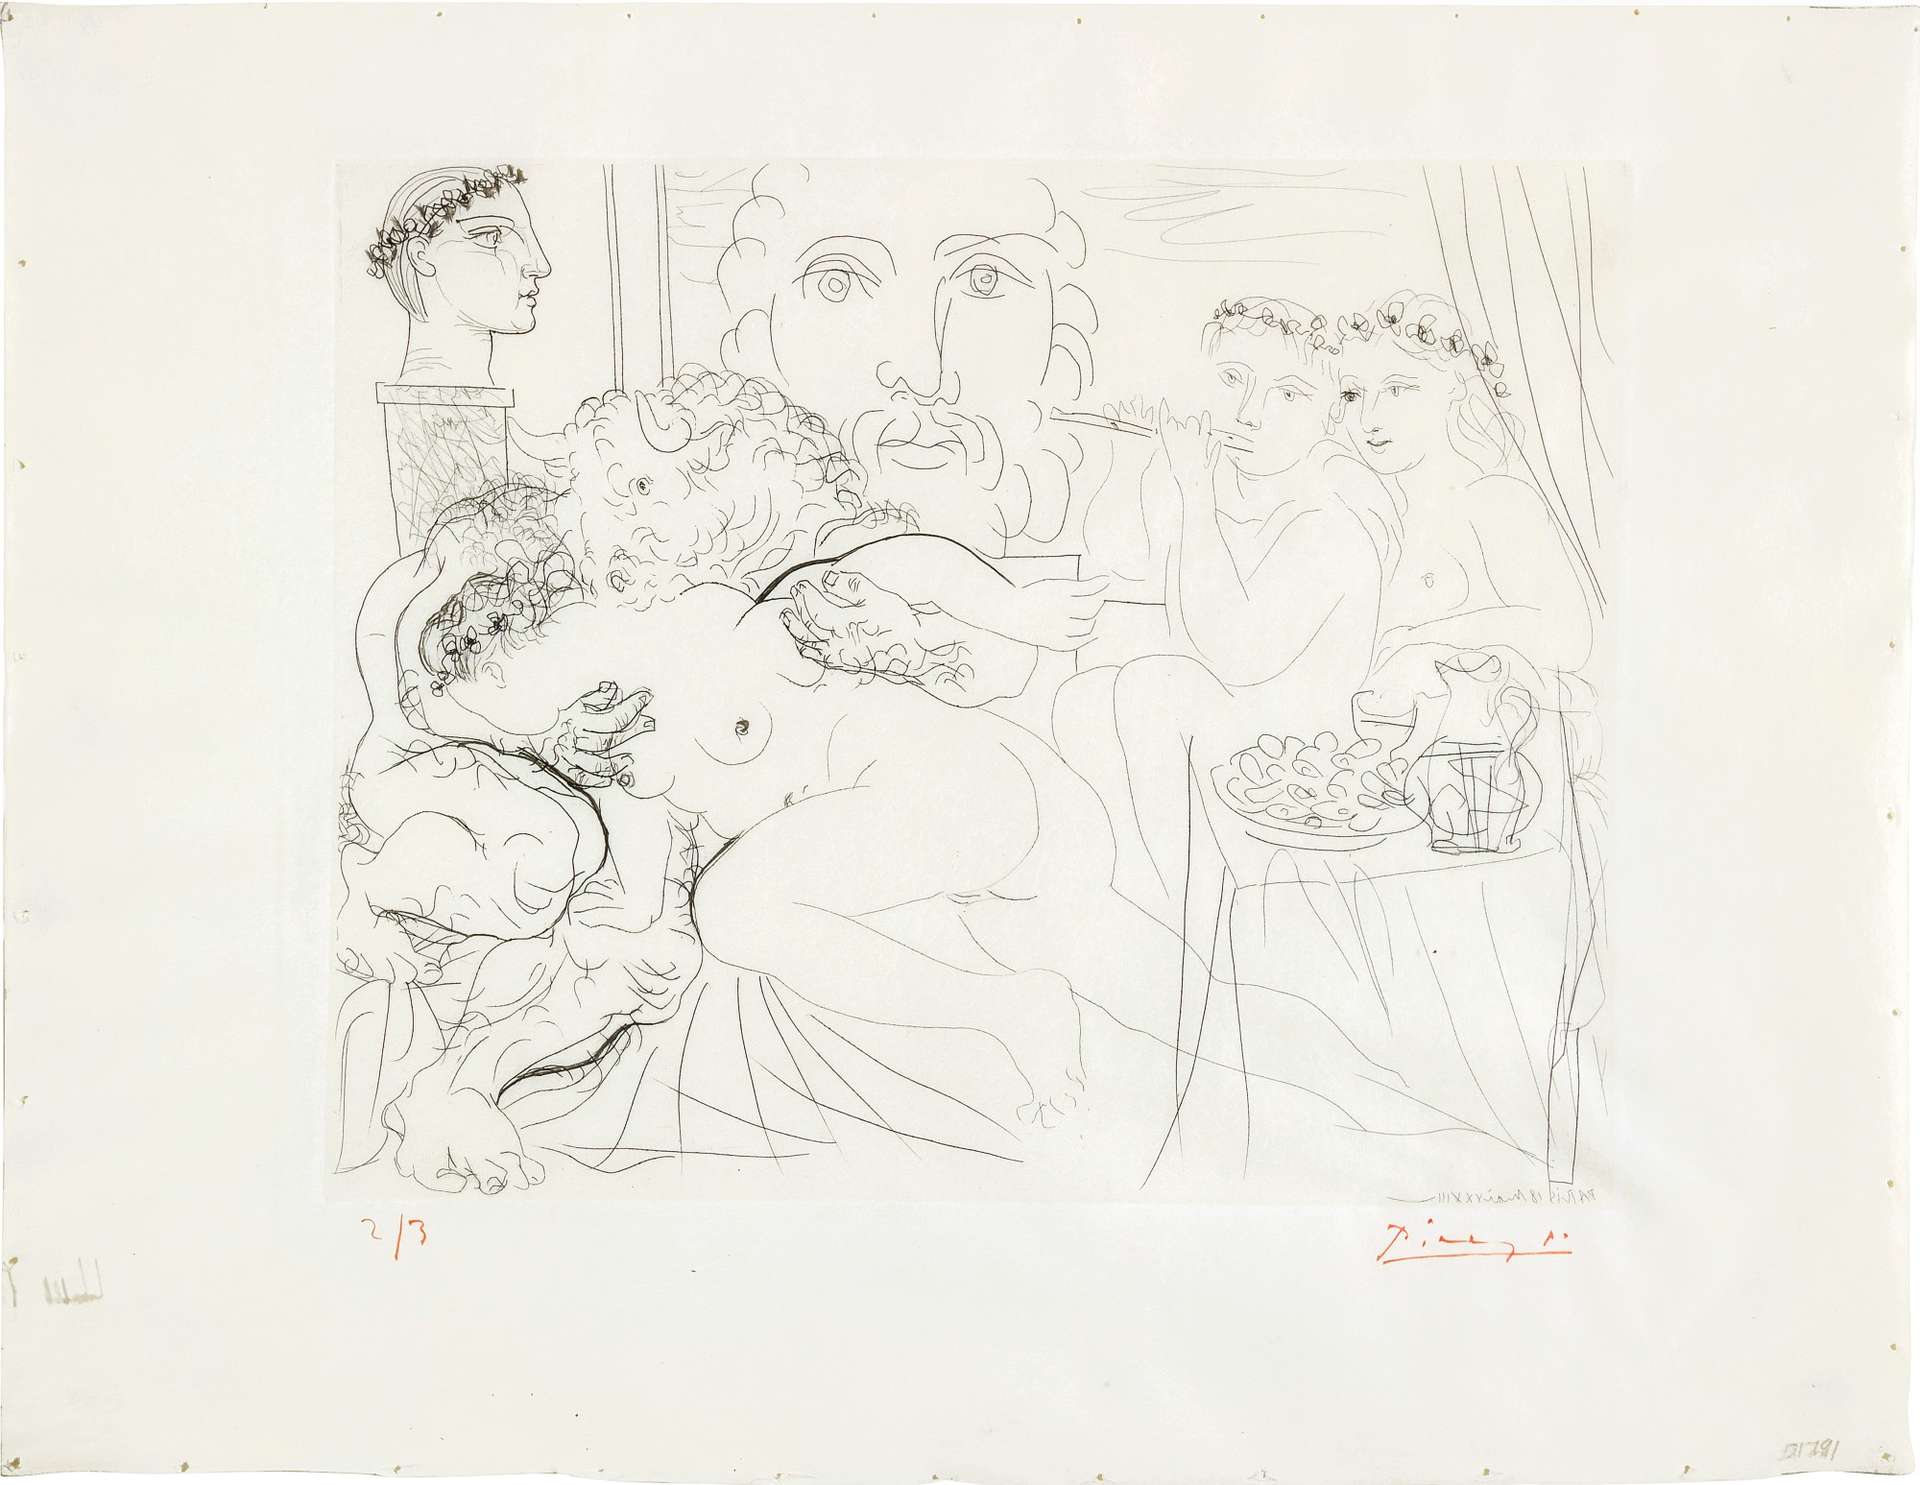 This monochrome print by Pablo Picasso shows a bacchanal scene, with several figures - including a Minotaur - surrounding a young nude woman. A classical-style bust stands in the background.